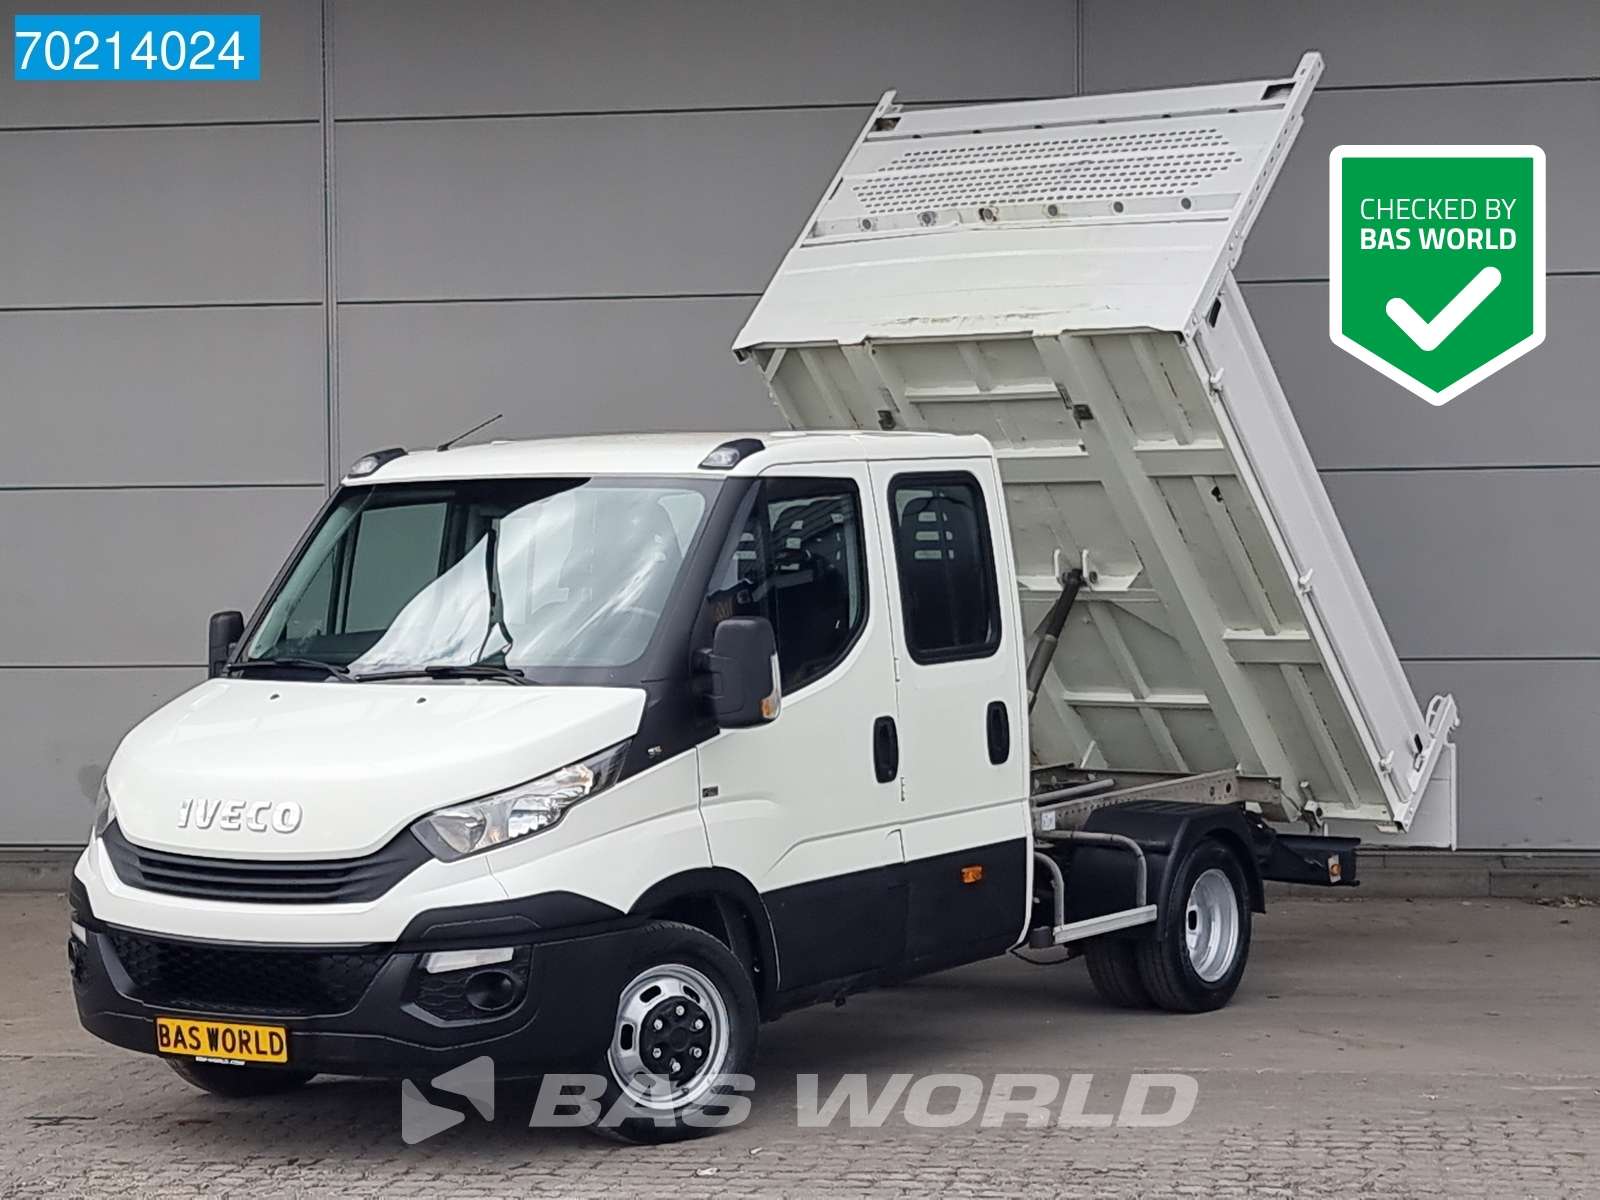 Iveco Daily Transporter in White used in VEGHEL for € 30,795.-